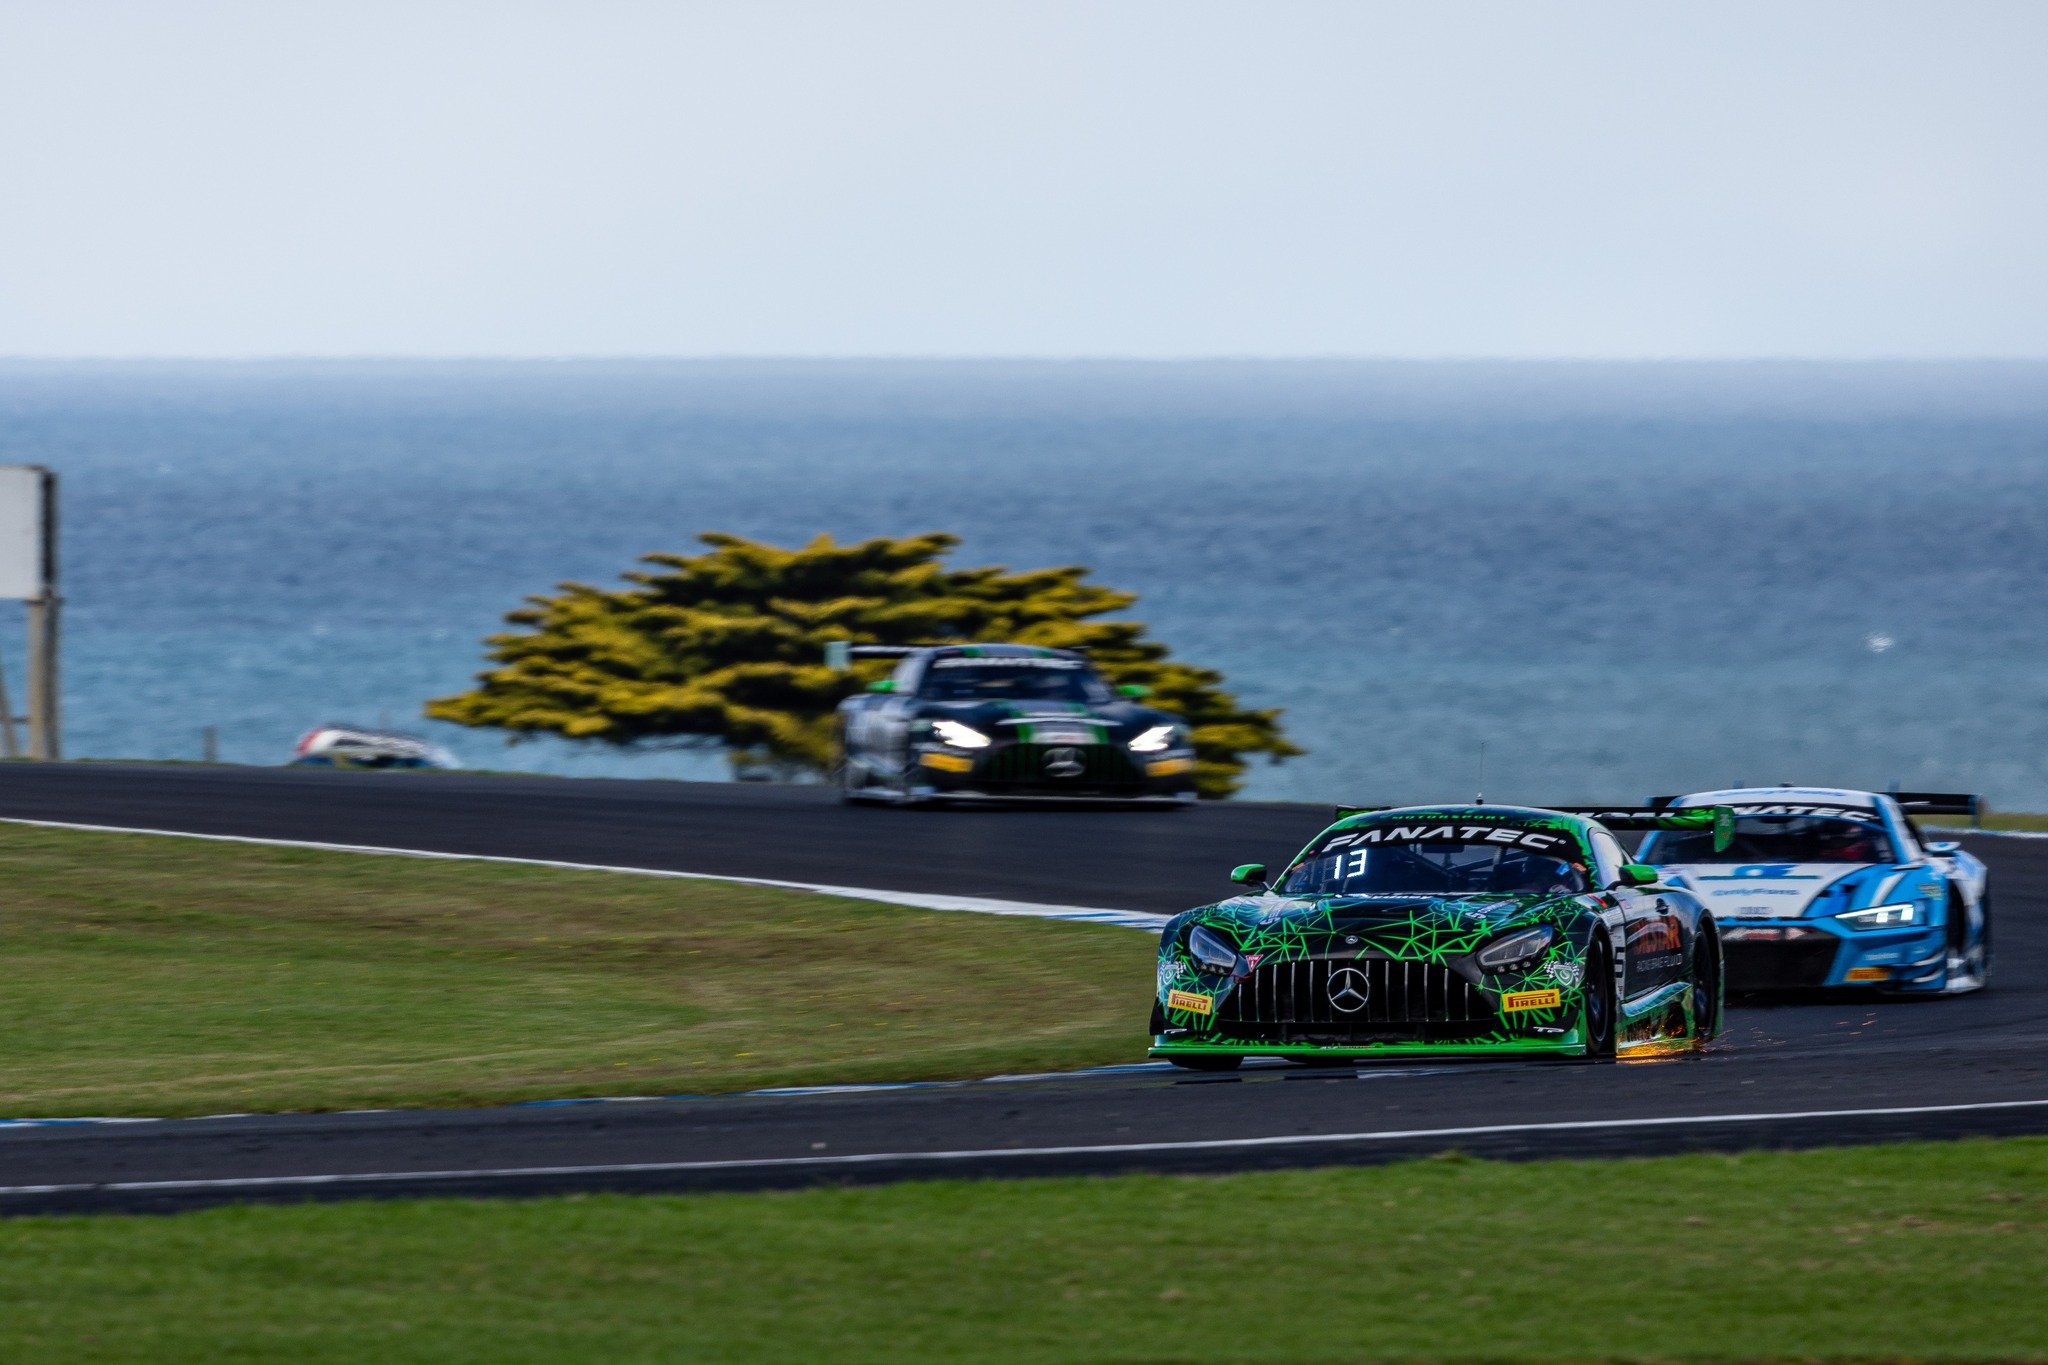 Solid day of practice to kick things off at Phillip Island. Rain interrupted the second session, but the Mercedes AMG felt good and we were on the pace in both sessions. 

Practice 1: P2 in Class - P10 Overall
Practice 2: P1 in Class - P10 Overall

B